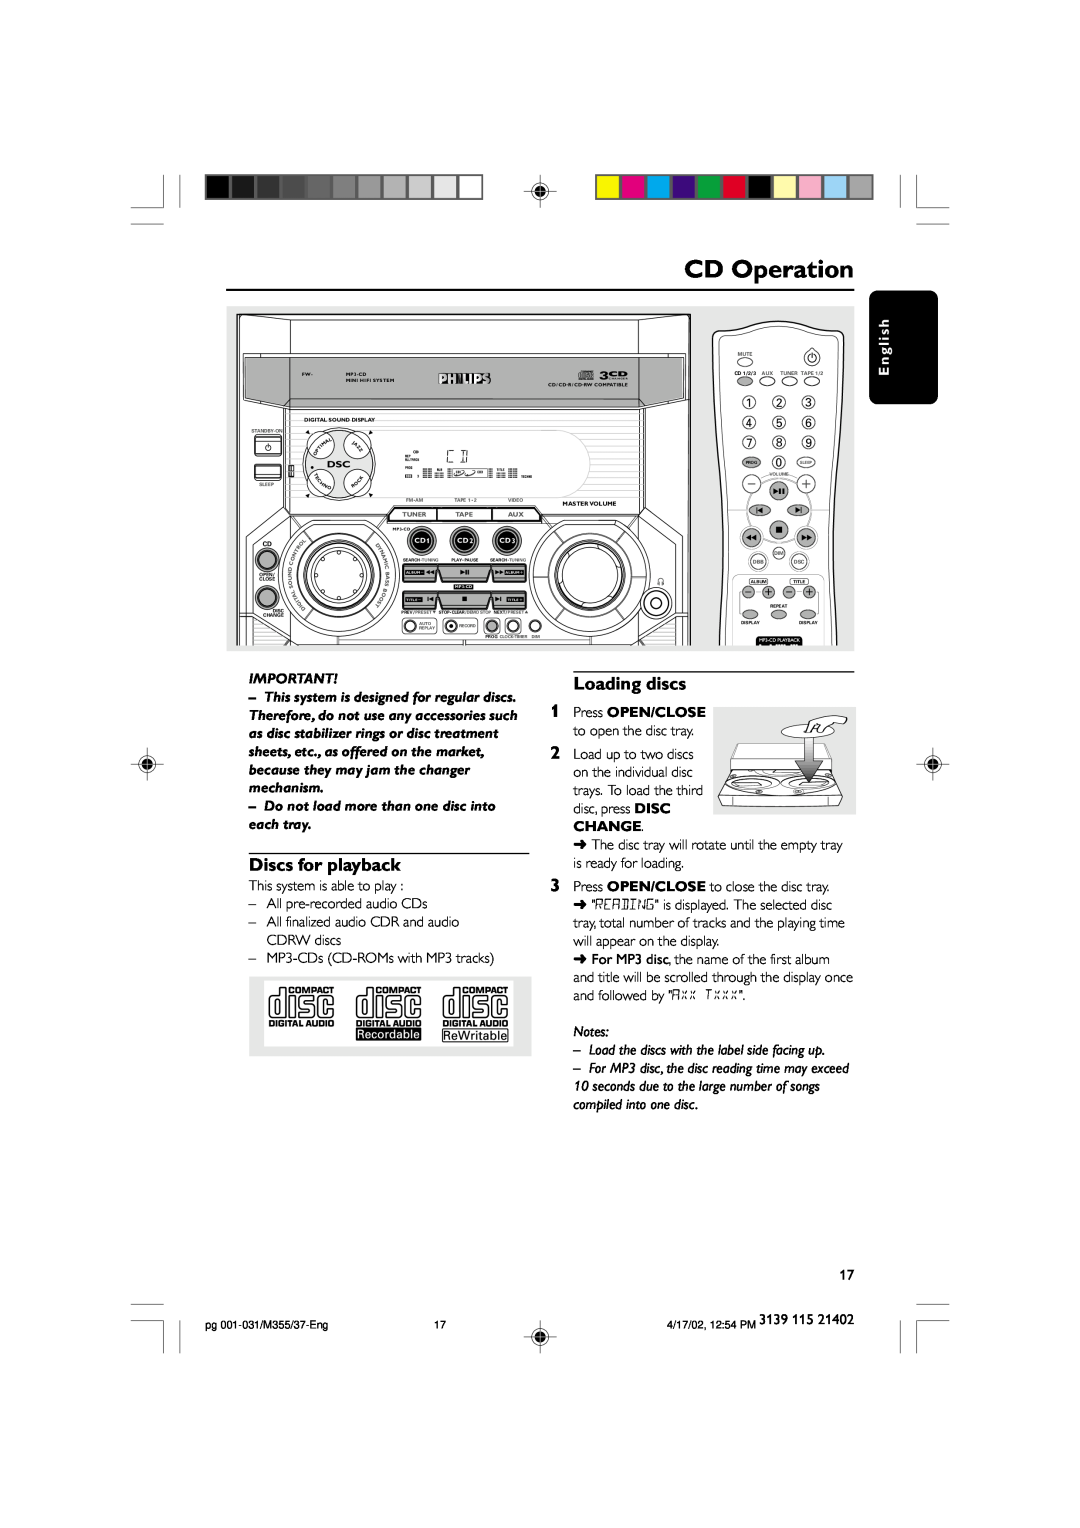 Philips M355 warranty CD Operation, Discs for playback, Loading discs, Press OPEN/CLOSE, Change, E n g l i s h 